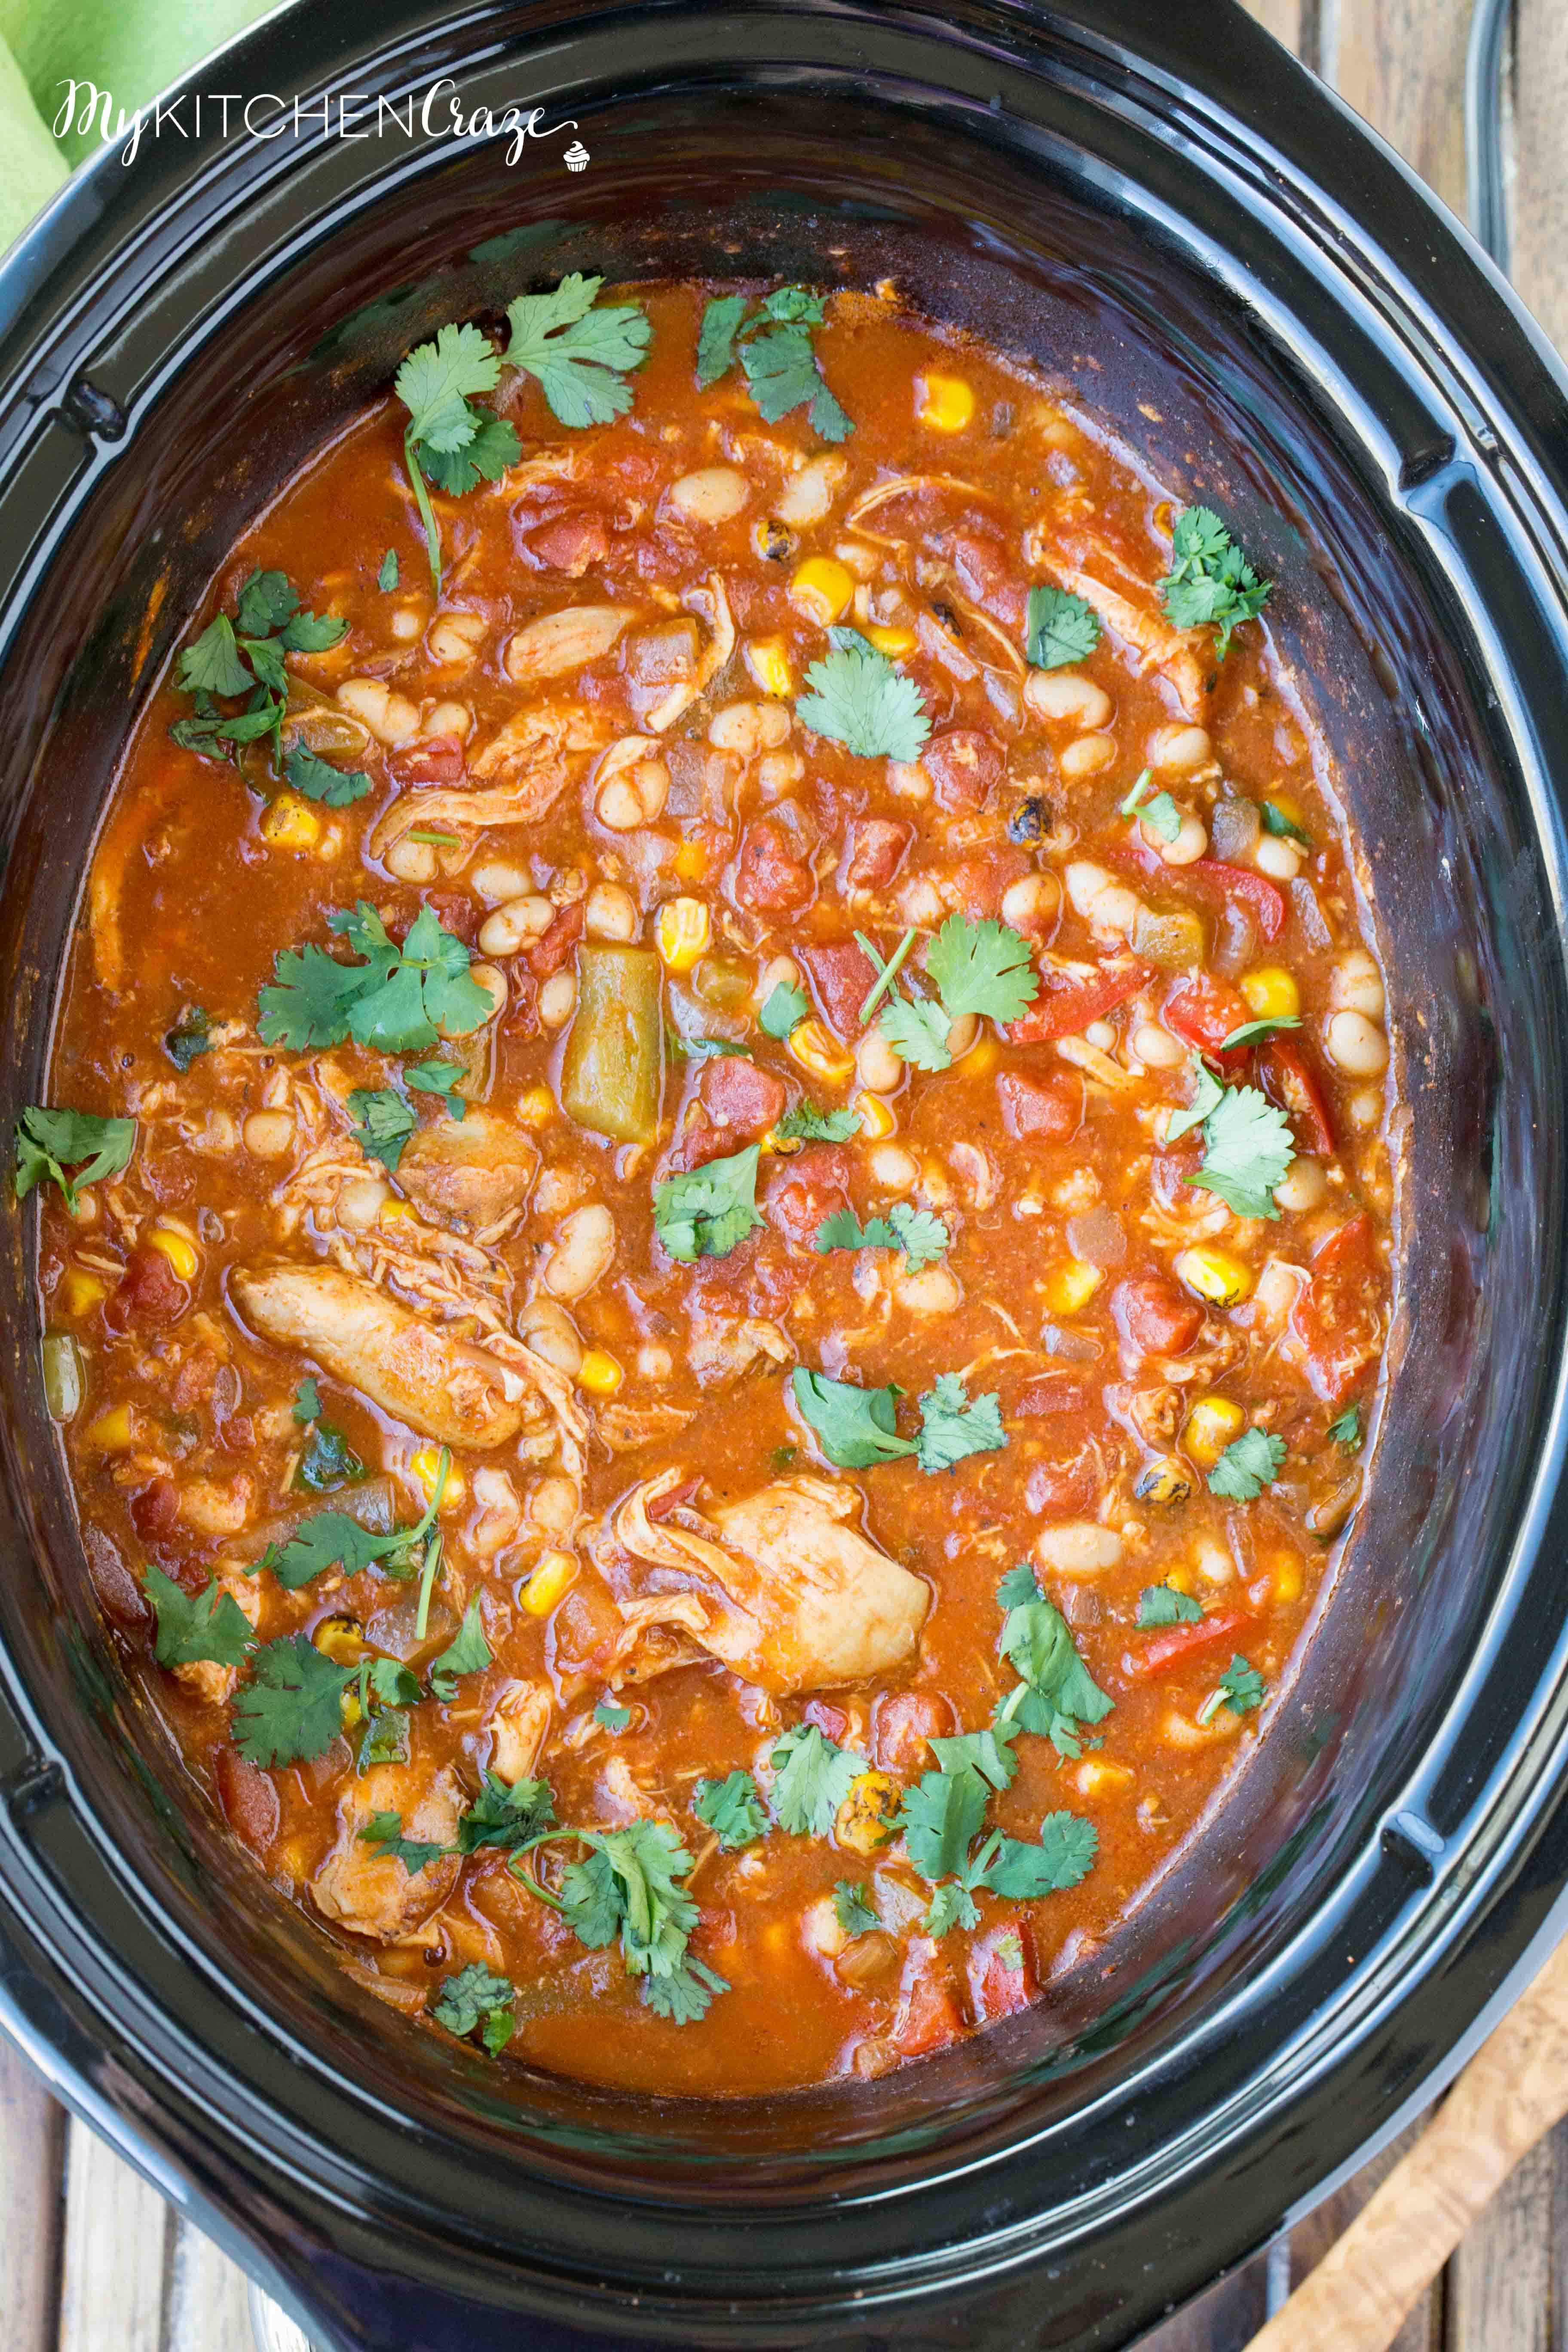 Slow Cooker Spanish Chicken ~ mykitchencraze.com ~ Put everything in the slow cooker and come home to a delicious meal waiting for you! Perfect with a side of rice or mashed potatoes!